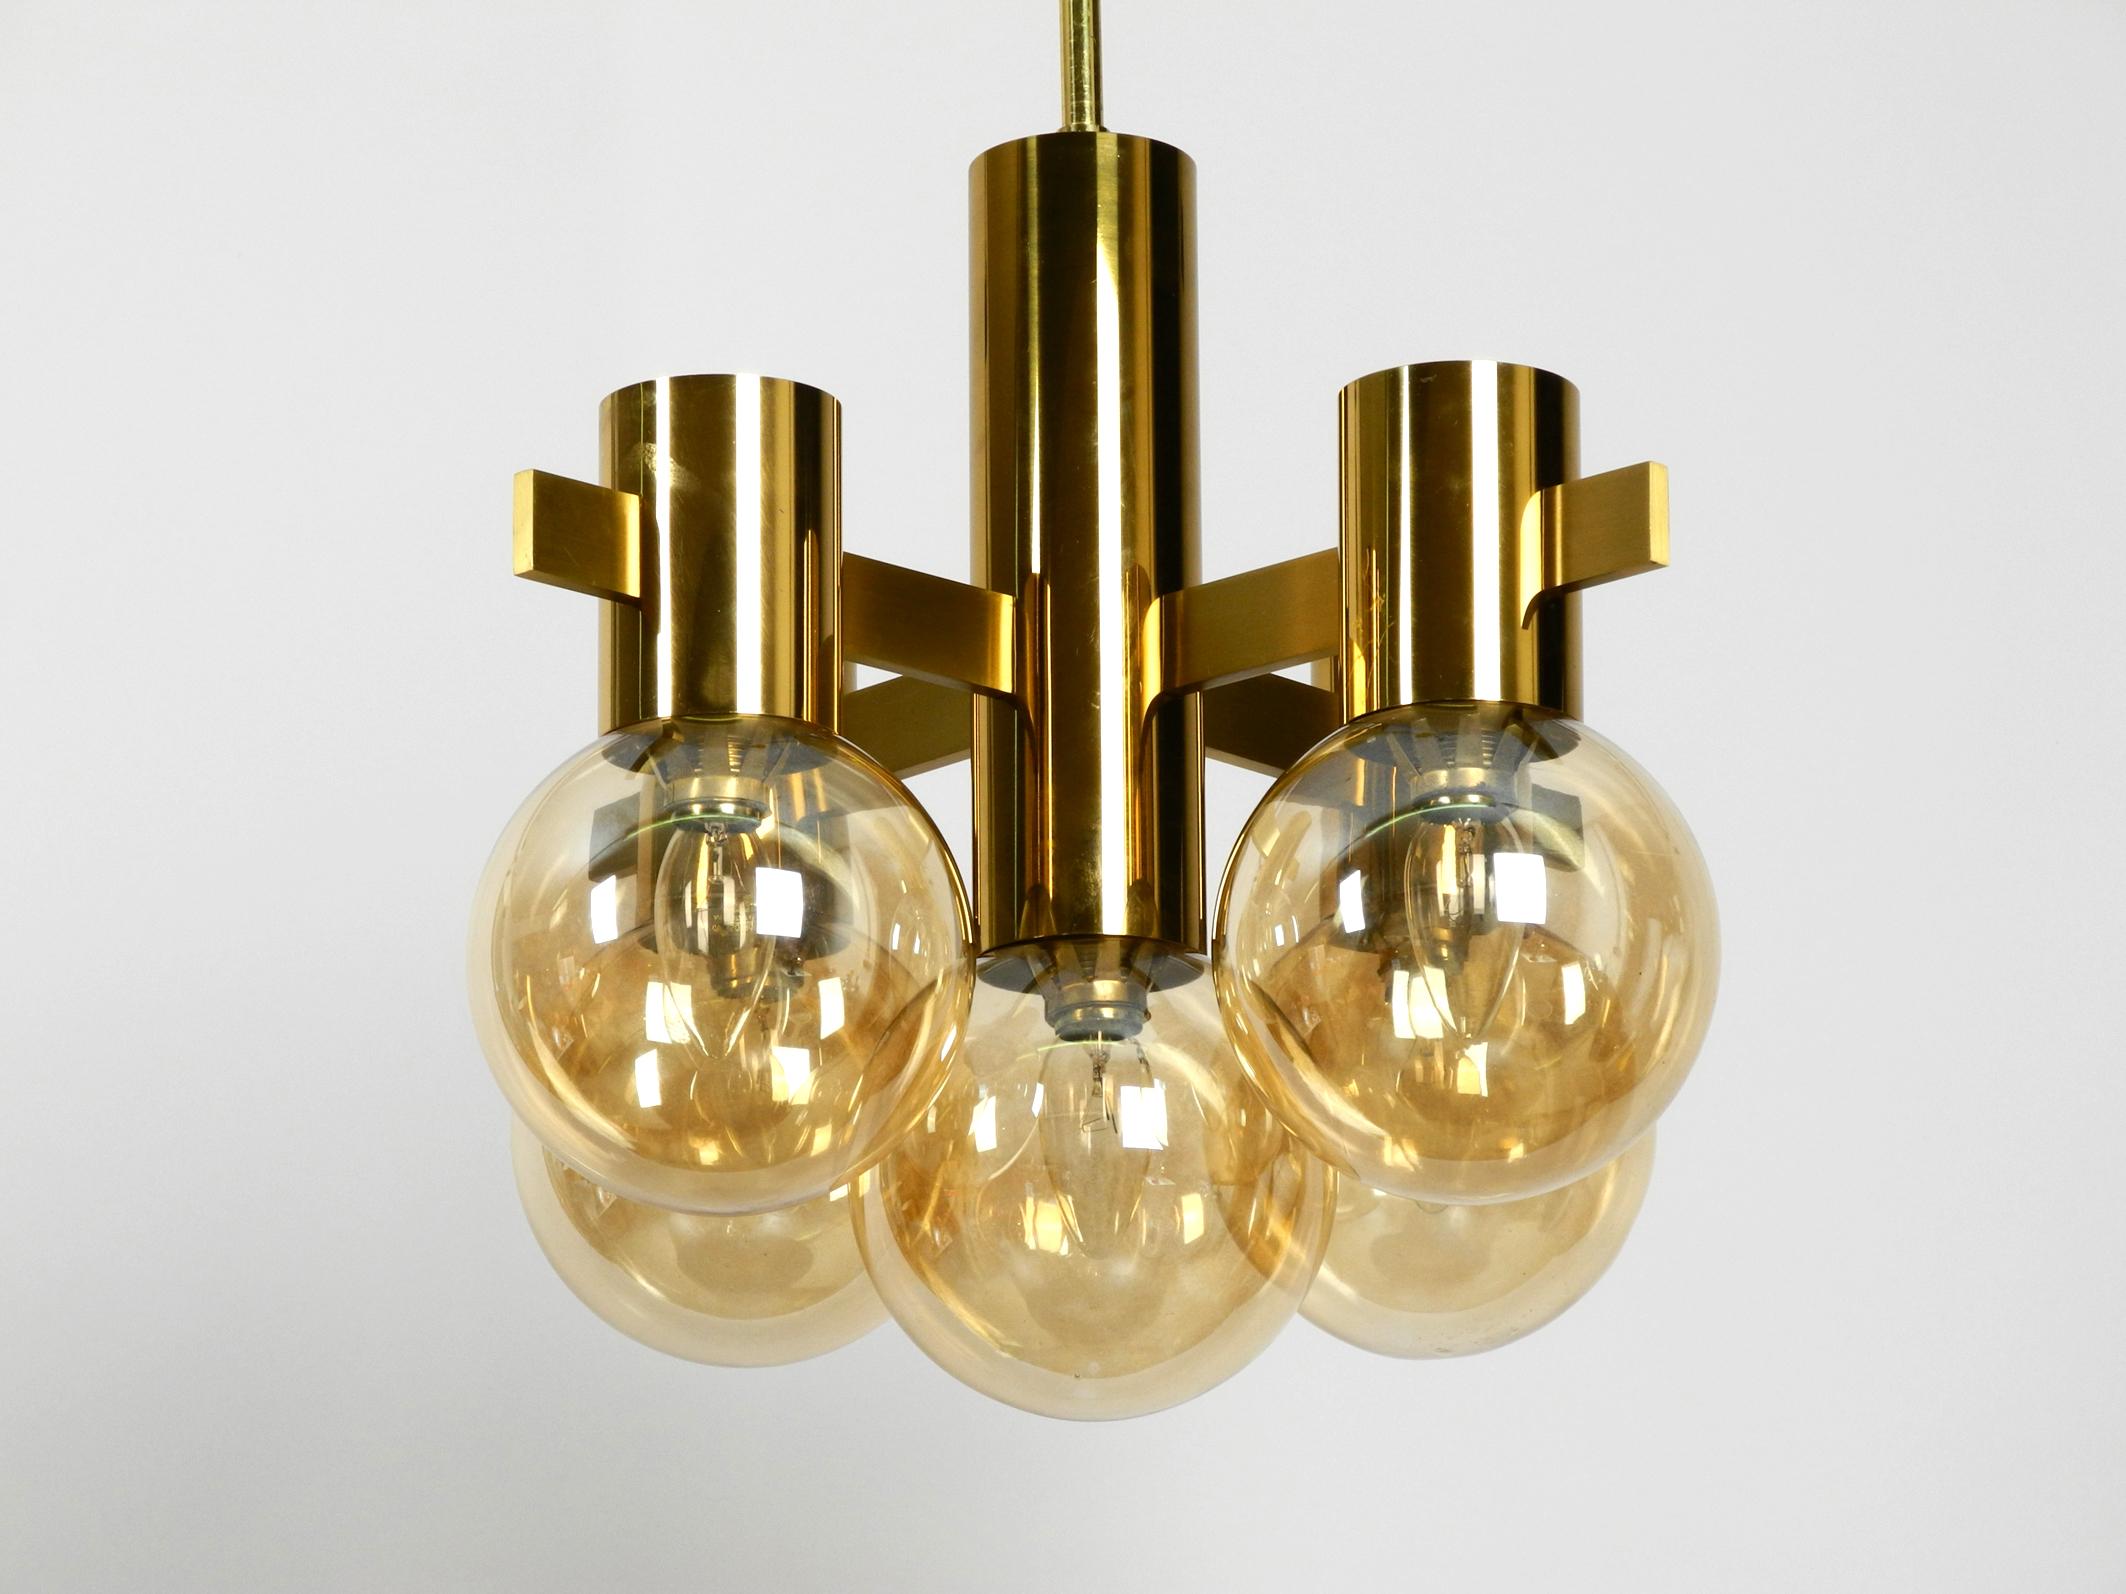 Beautiful 1960s Brass Ceiling Lamp by Hans Agne Jakobsson with 5 Glass Balls 5